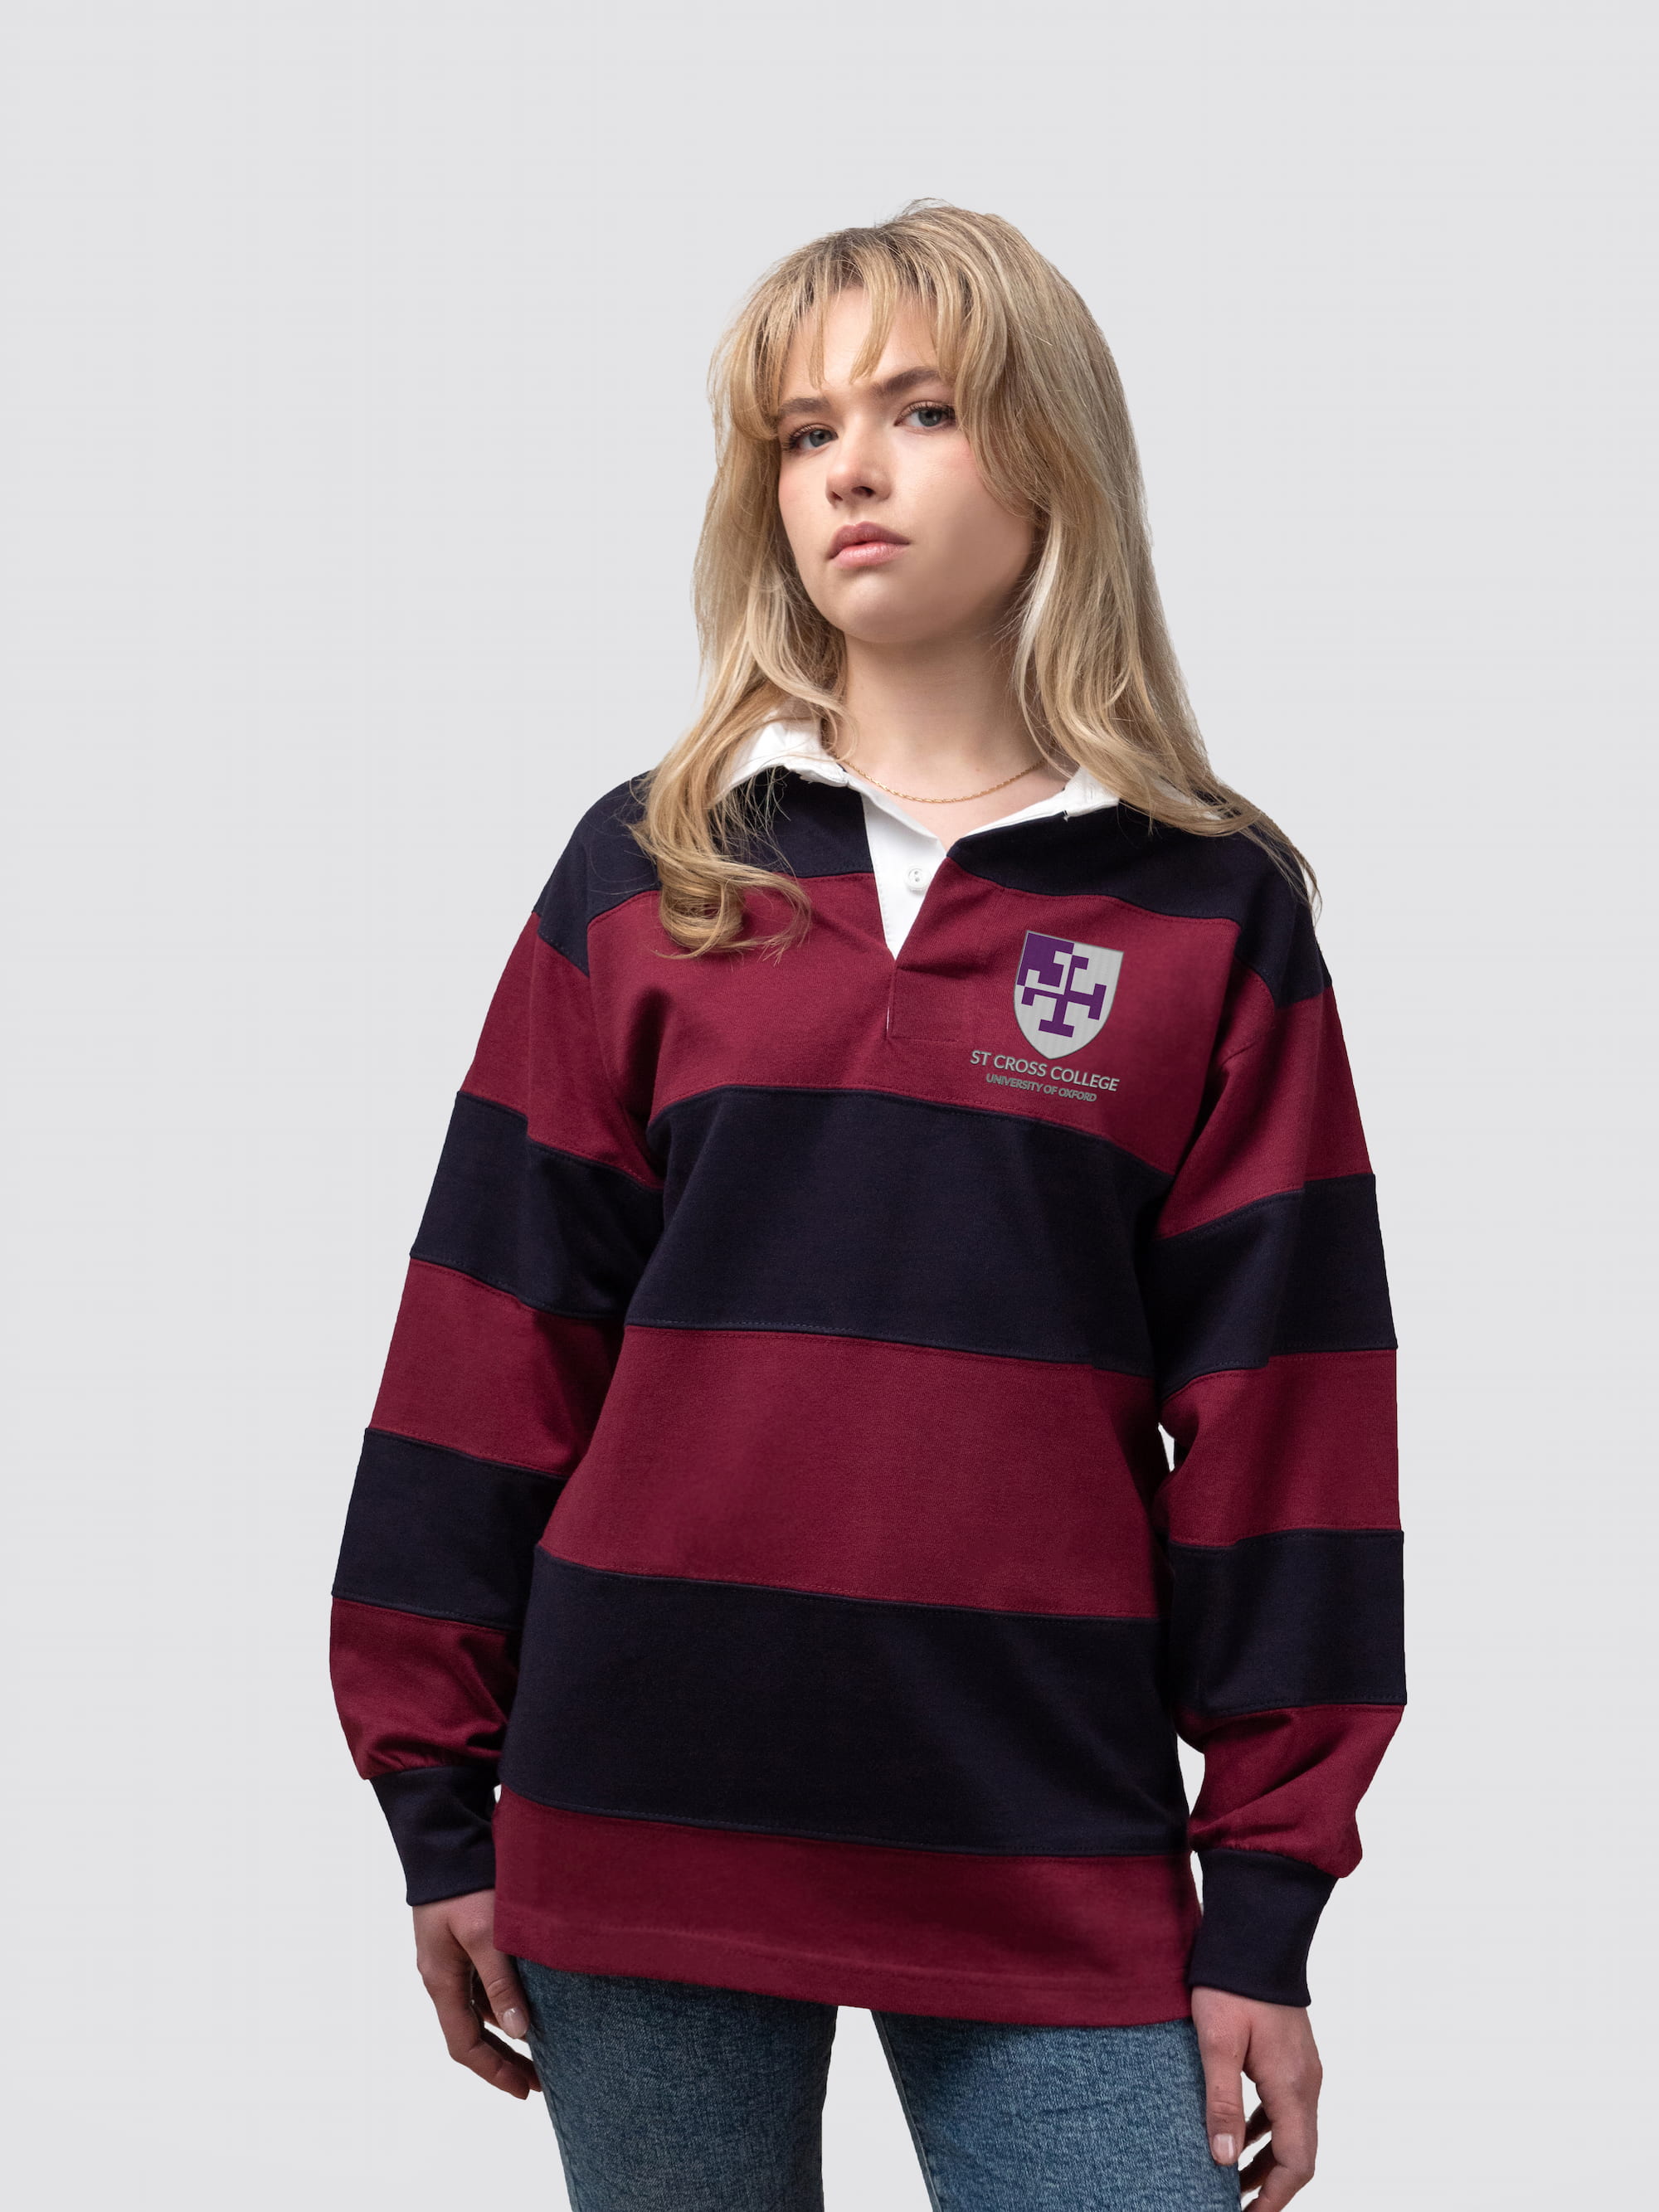 St Cross College rugby shirt, with burgundy and navy stripes